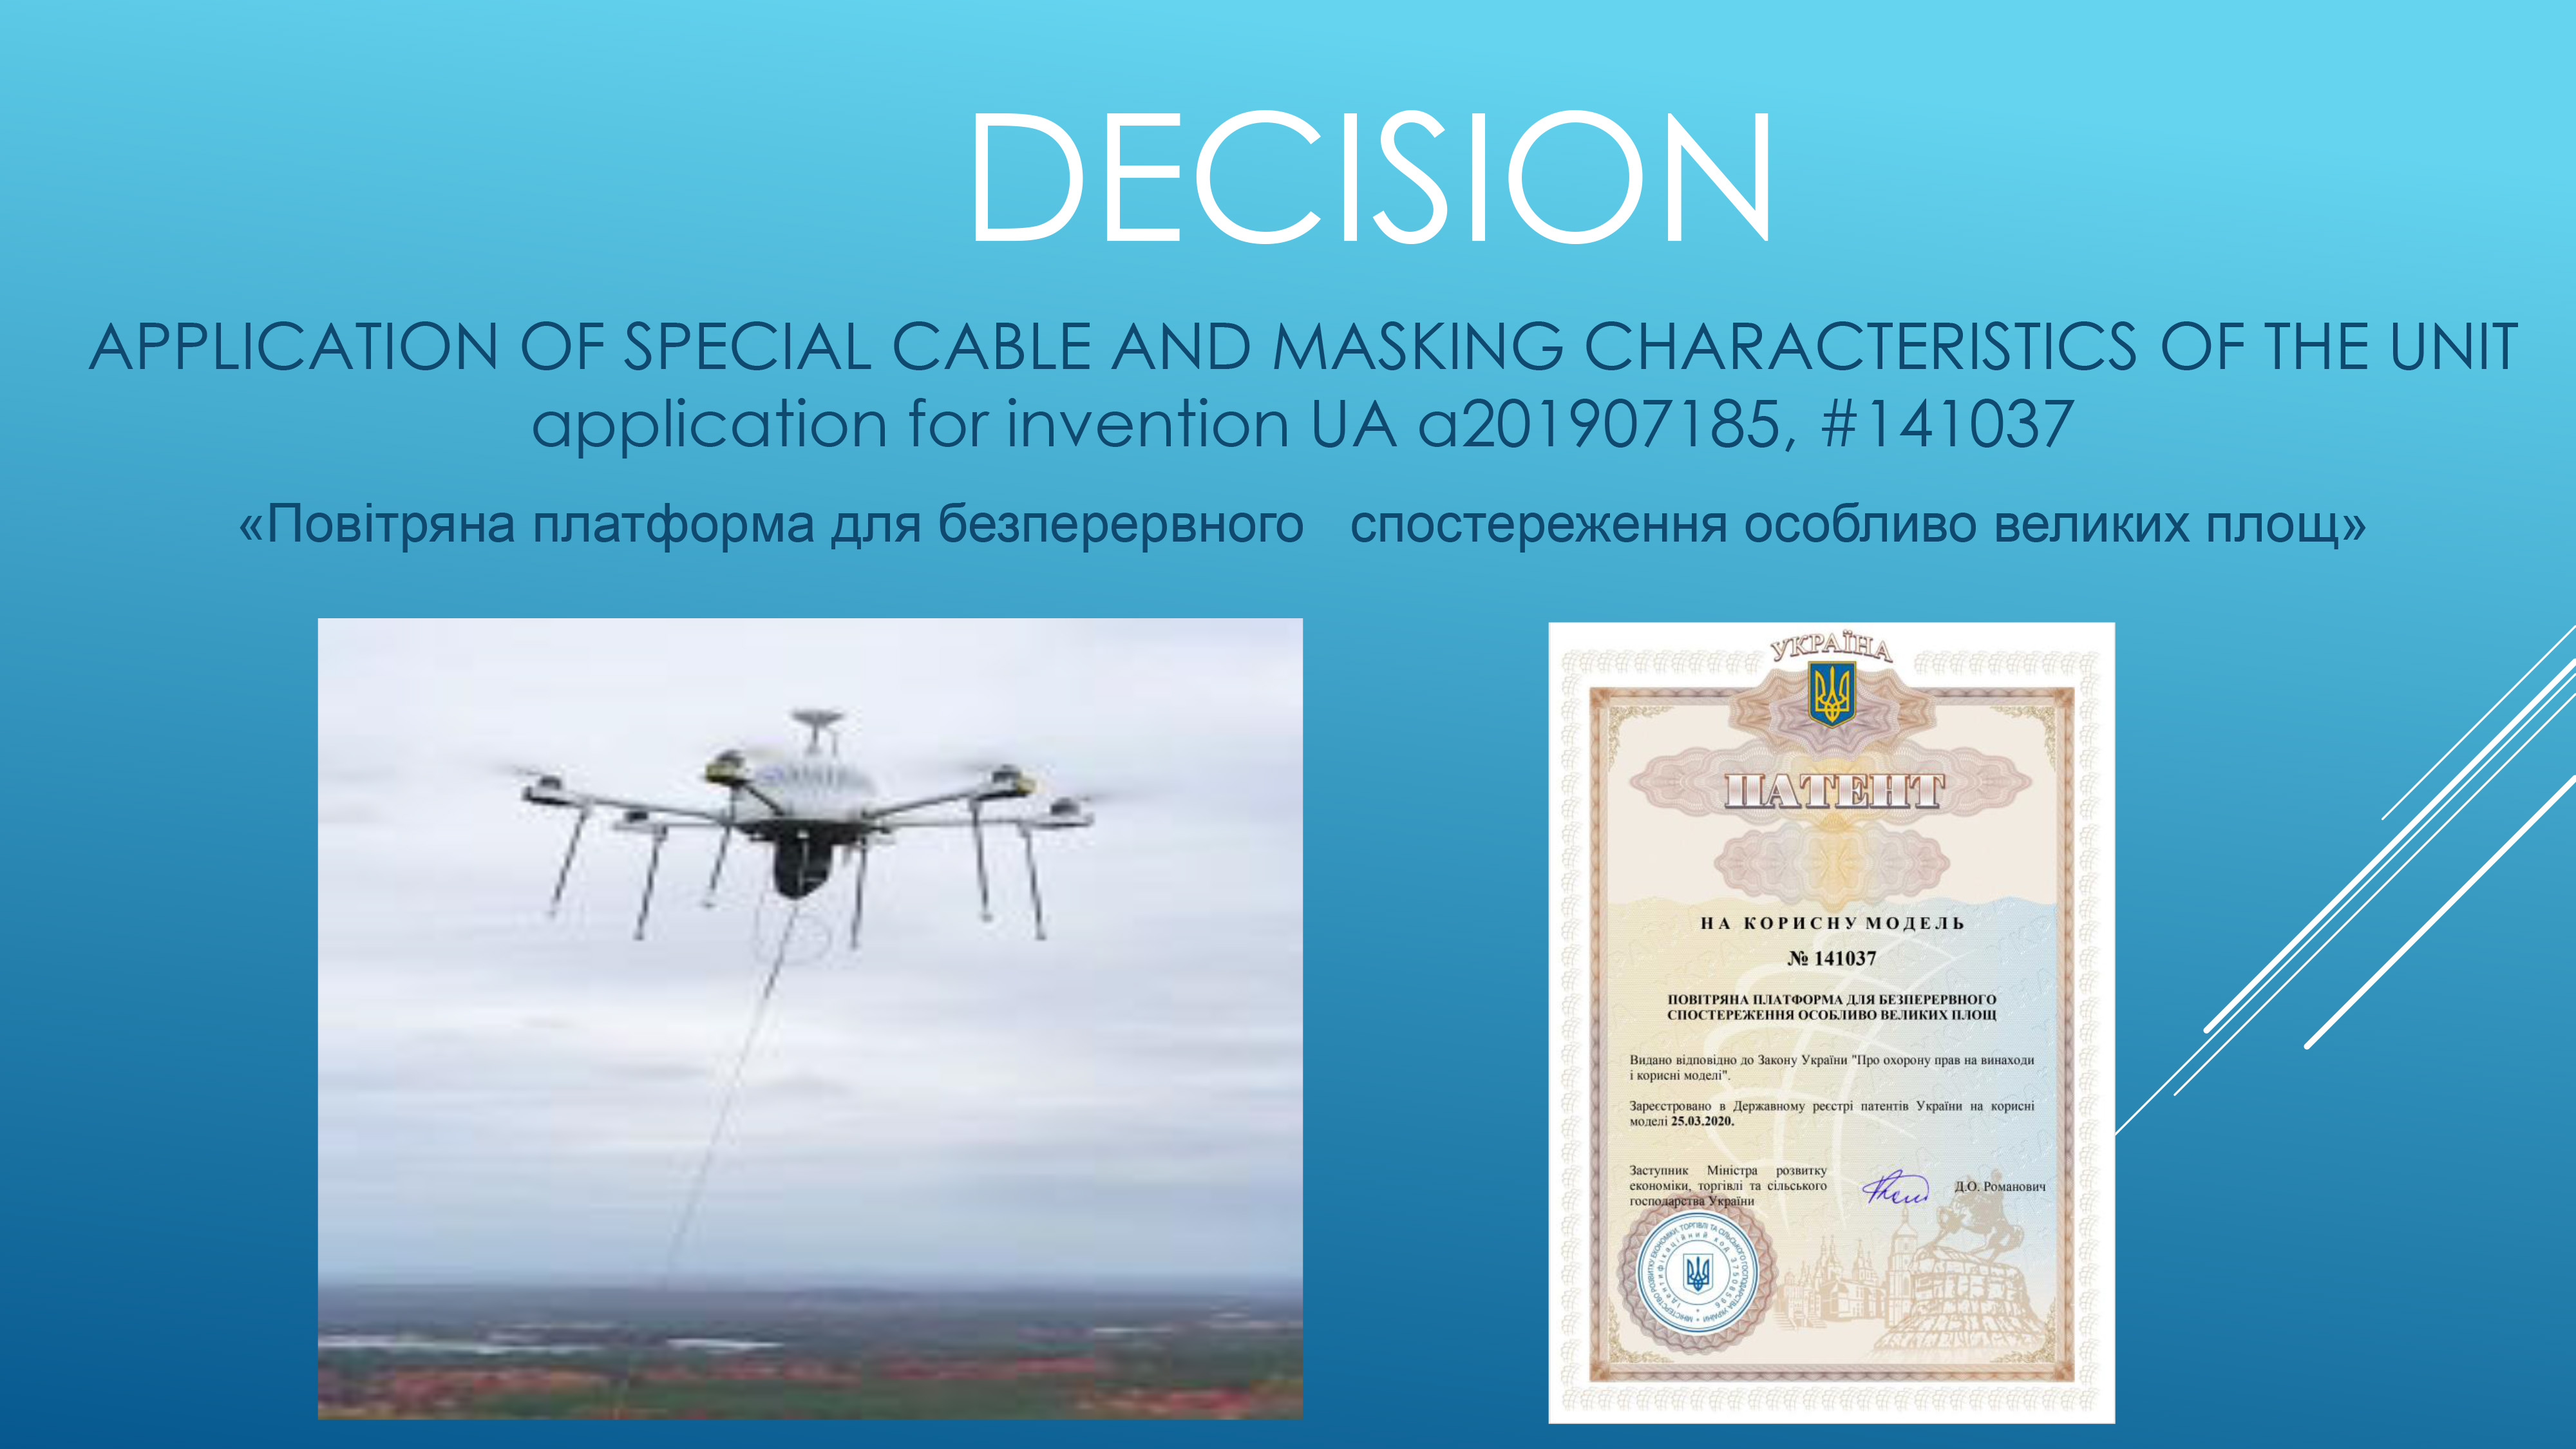 Stealth DRON with continuous operation and power via a special cable